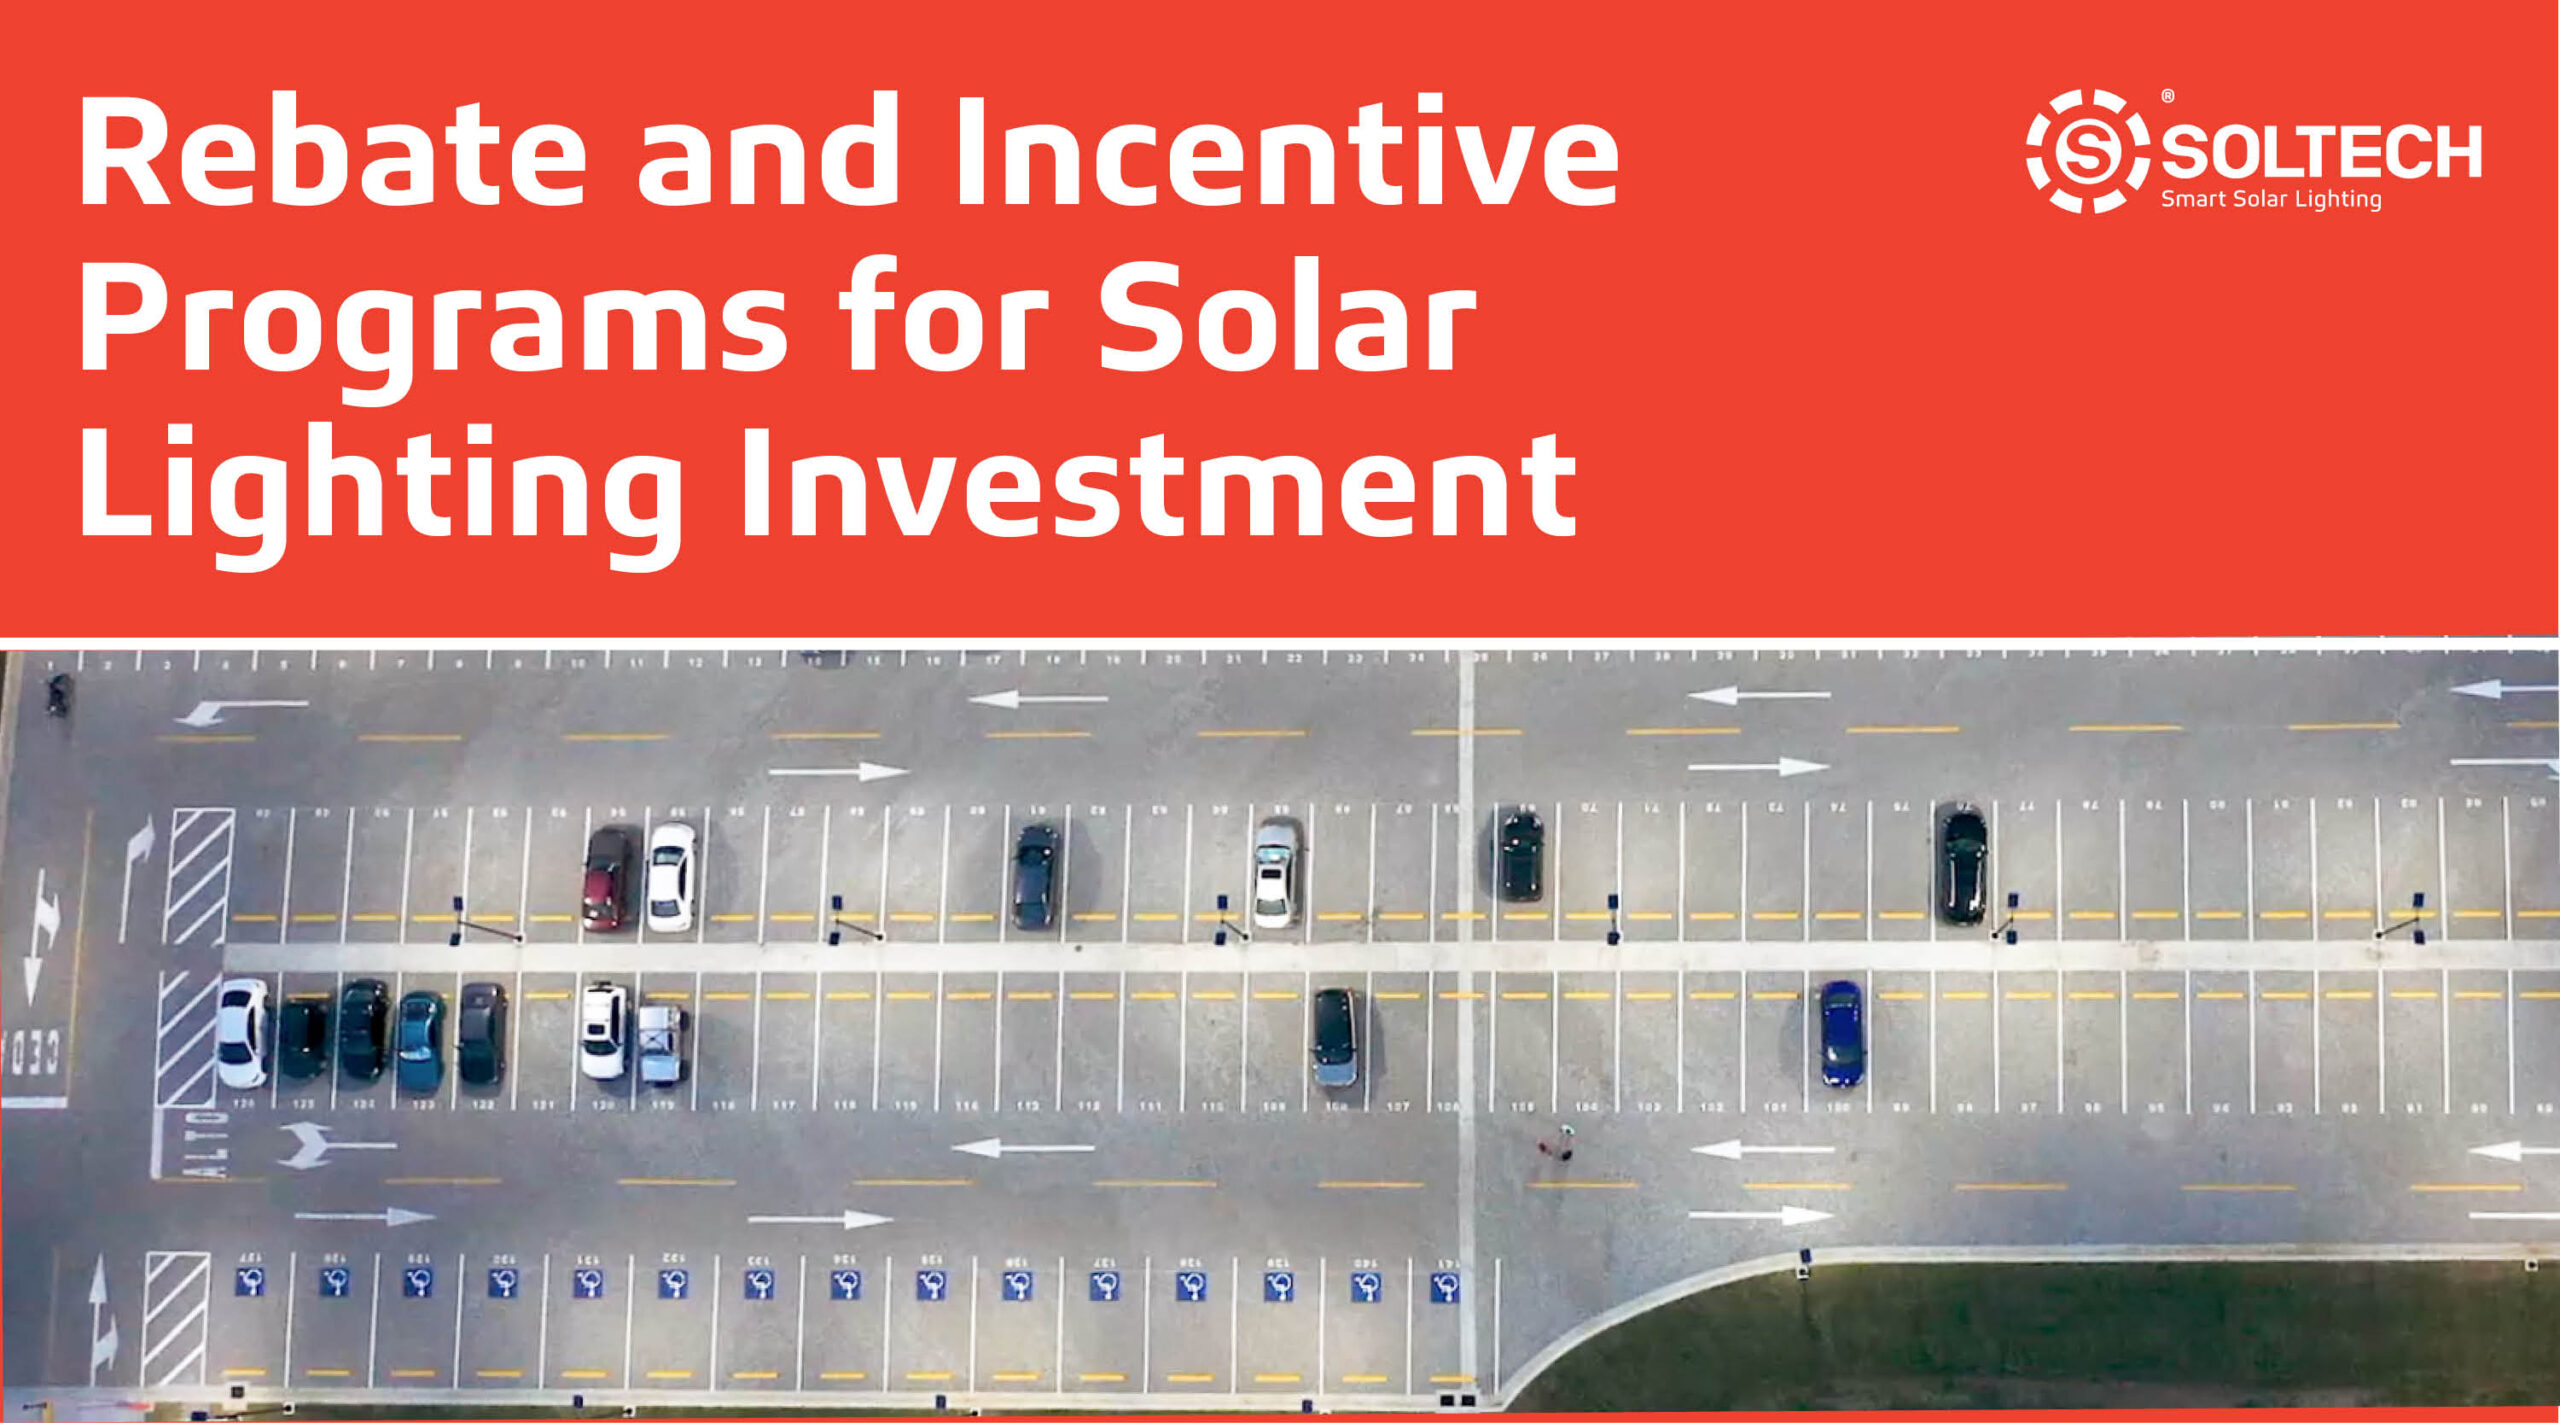 Rebate and Incentive Programs for Solar Lighting Investment